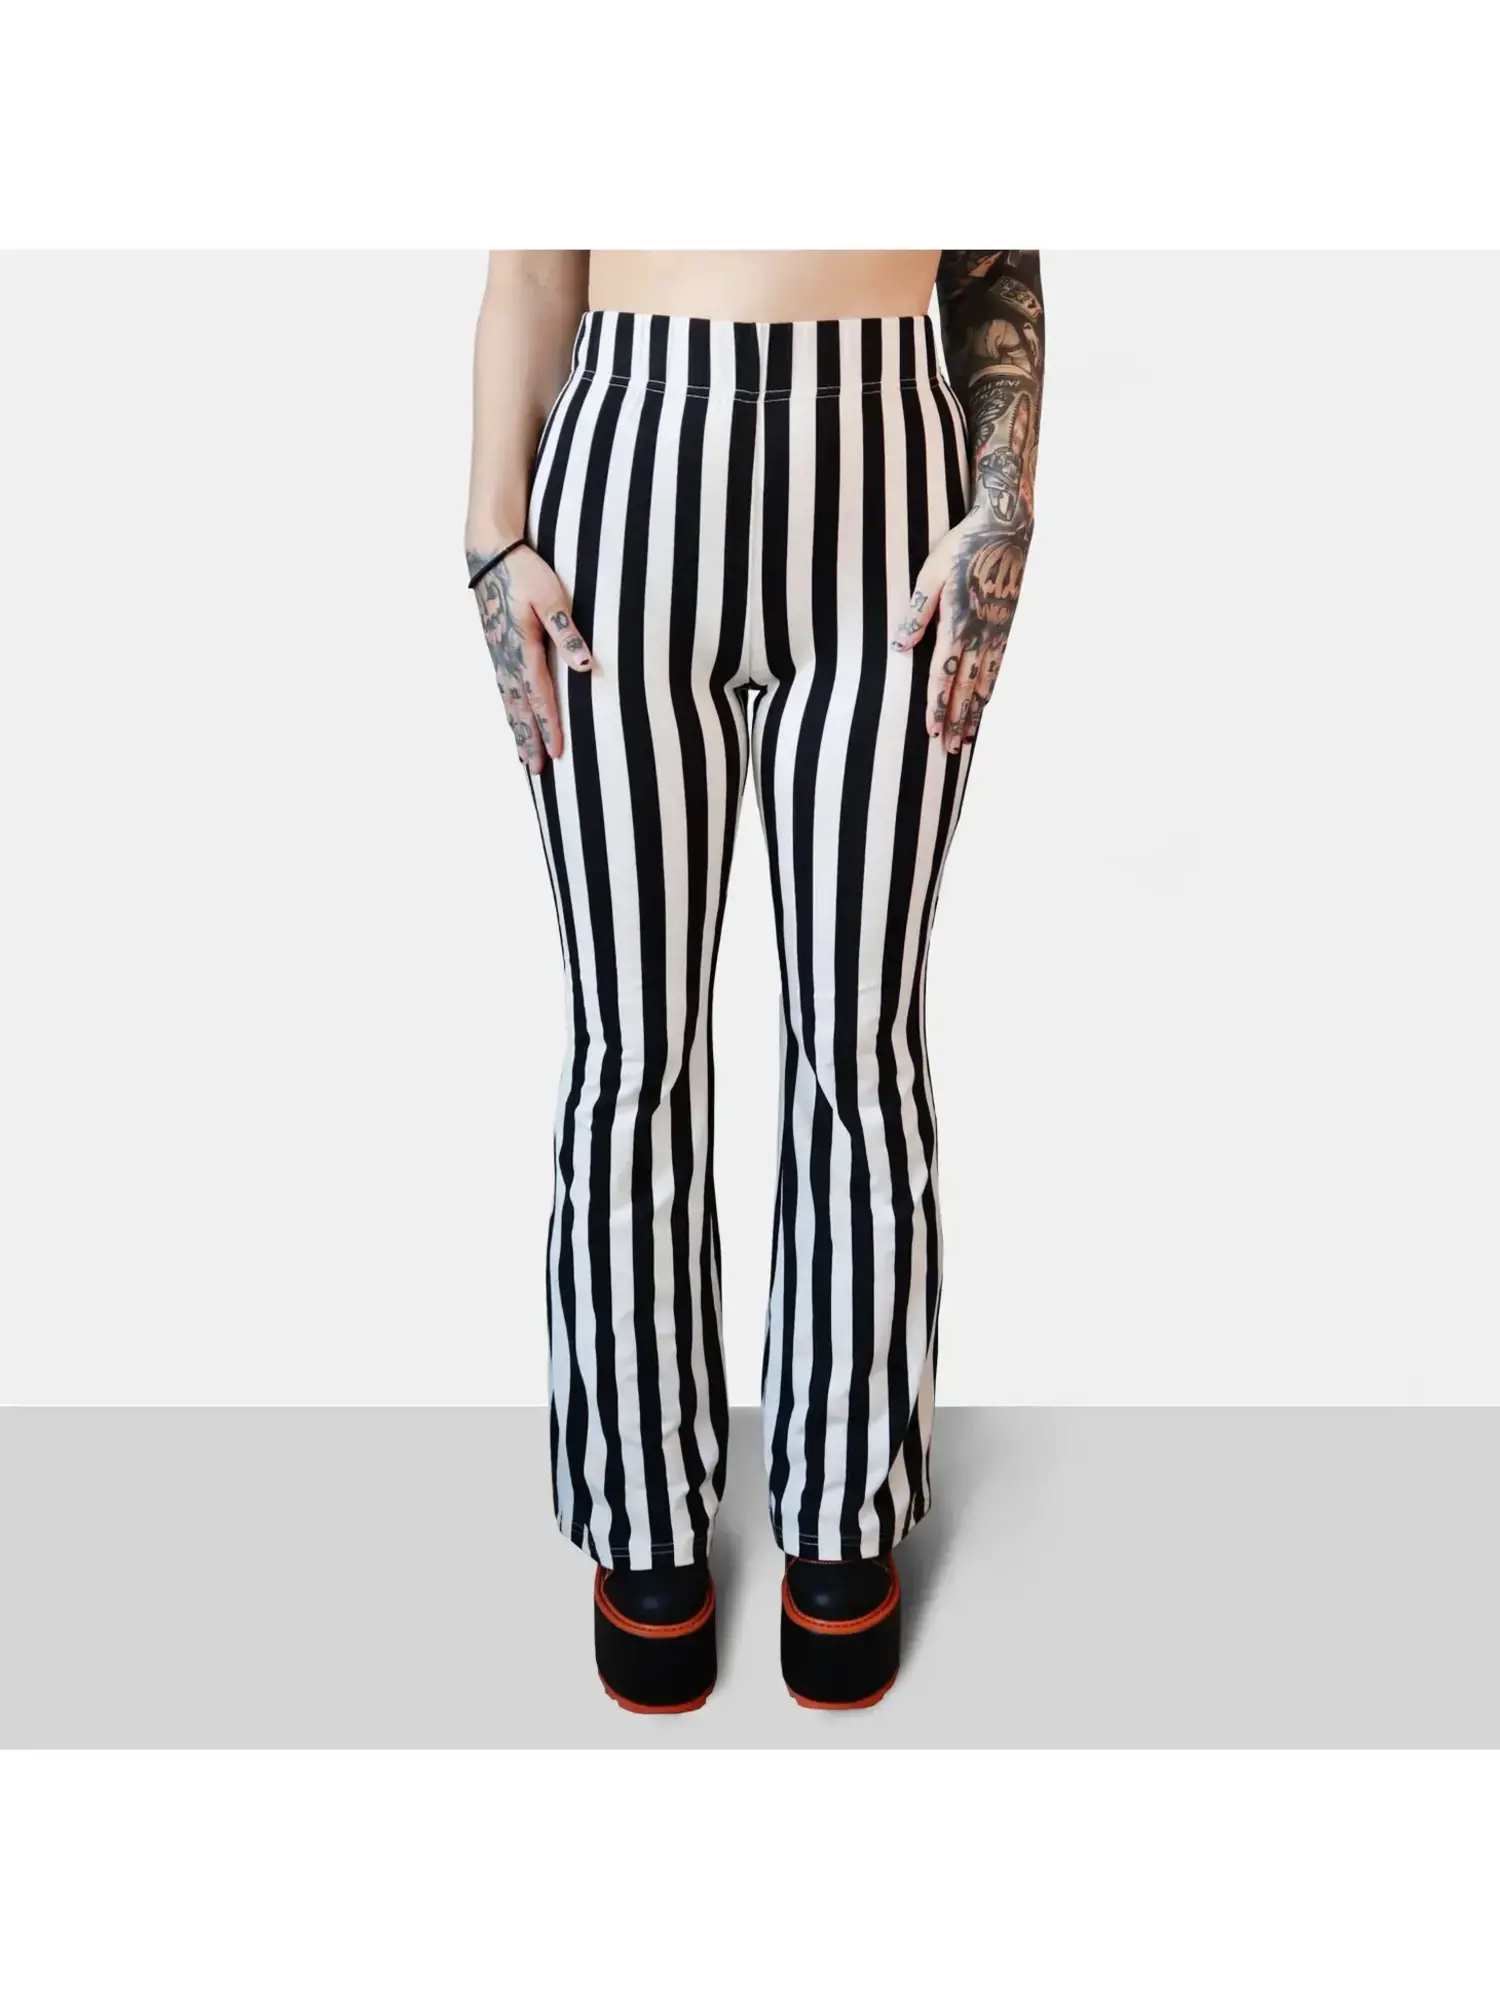 YUIJ Women's Casual Vertical Striped Pants,Stretch High Waist Loose Big Flared  Wide-Leg Trousers, Bell Bottoms Jeans,Light Blue,L : Amazon.co.uk: Fashion